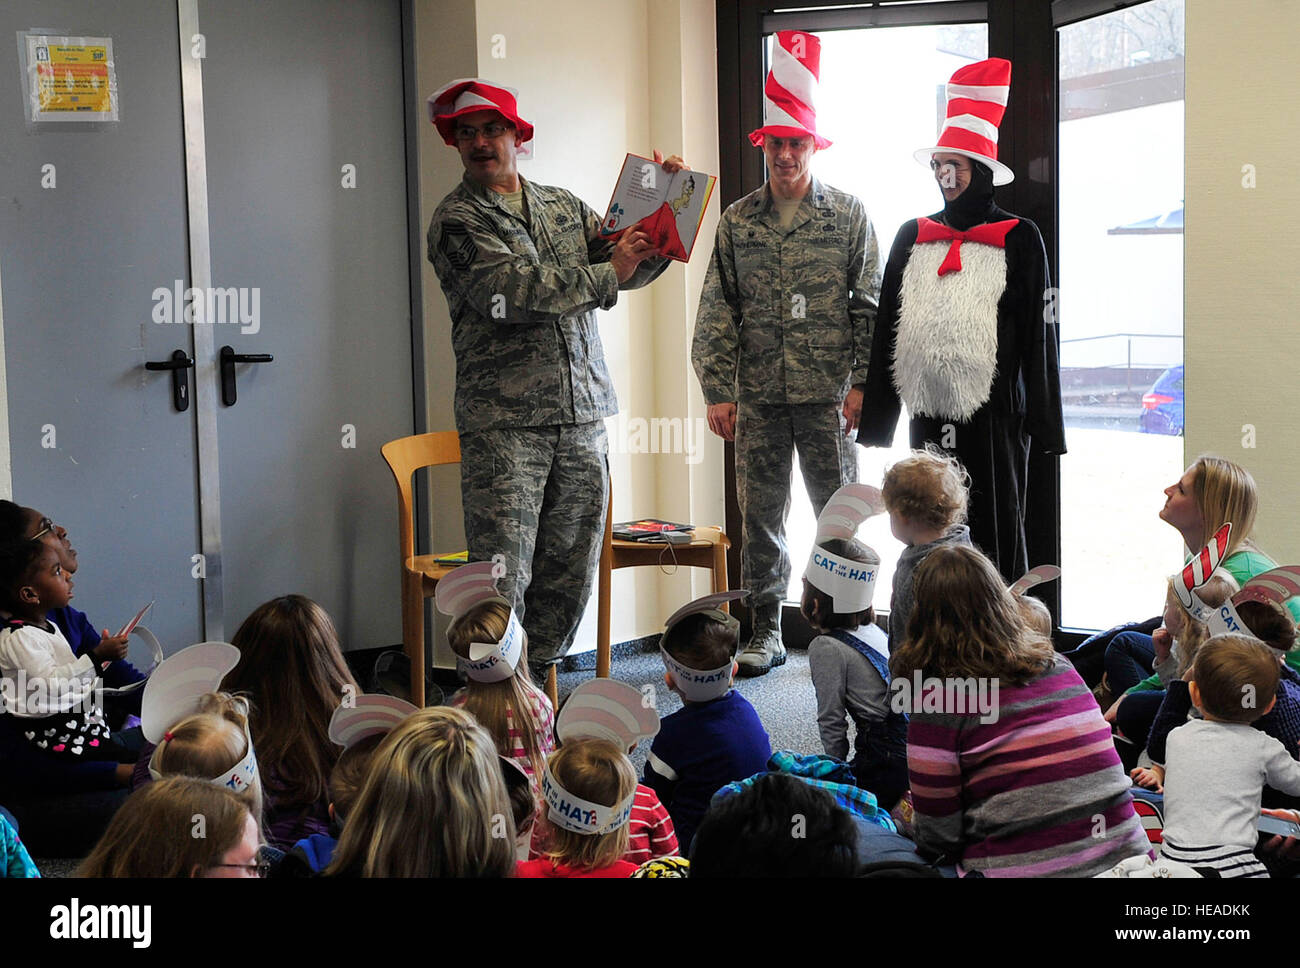 Chief Master Sgt. Steven Mandell, 86th Force Support Squadron superintendent, reads Dr. Seuss’s “Green Eggs and Ham” to children and their parents during Read Across America, March 5, 2015, at Ramstein Air Base, Germany. The event consisted of story-time, snacks and free books for the children. Airman 1st Class Larissa Greatwood) Stock Photo